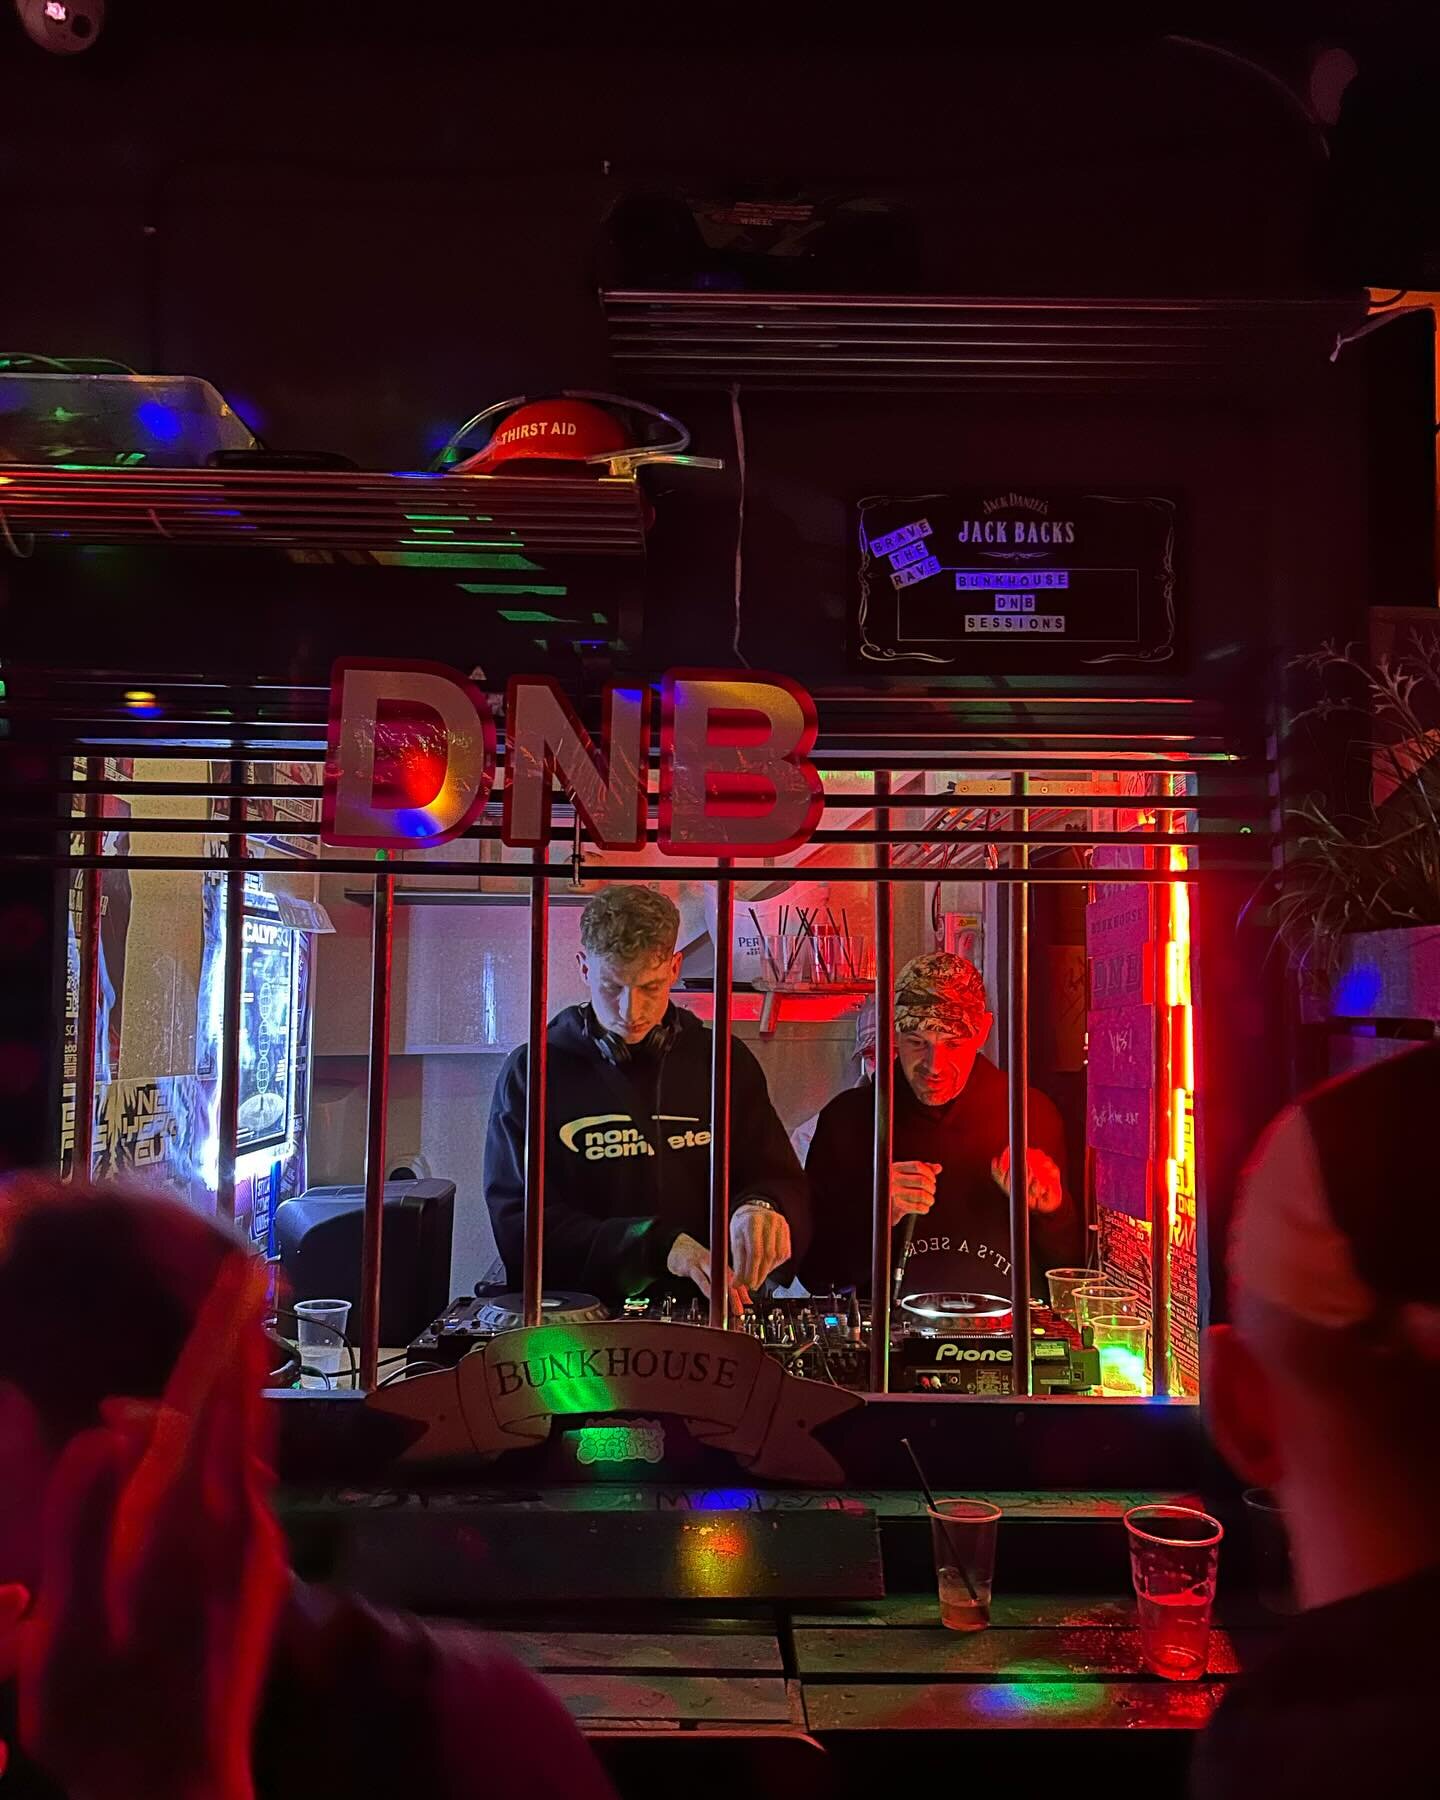 HOFFI💥

This Was Fucking Brilliant🤩

Thank You To Everyone Who Came Along💜

Hoffi 03 Coming Soon👀 #dnb #dnbmusic #drumandbassmusic #dj #mc #event #cardiff #wales #hostel #rave #club #citylife #garage #140 #dubstep #hiphop #vibes #pints